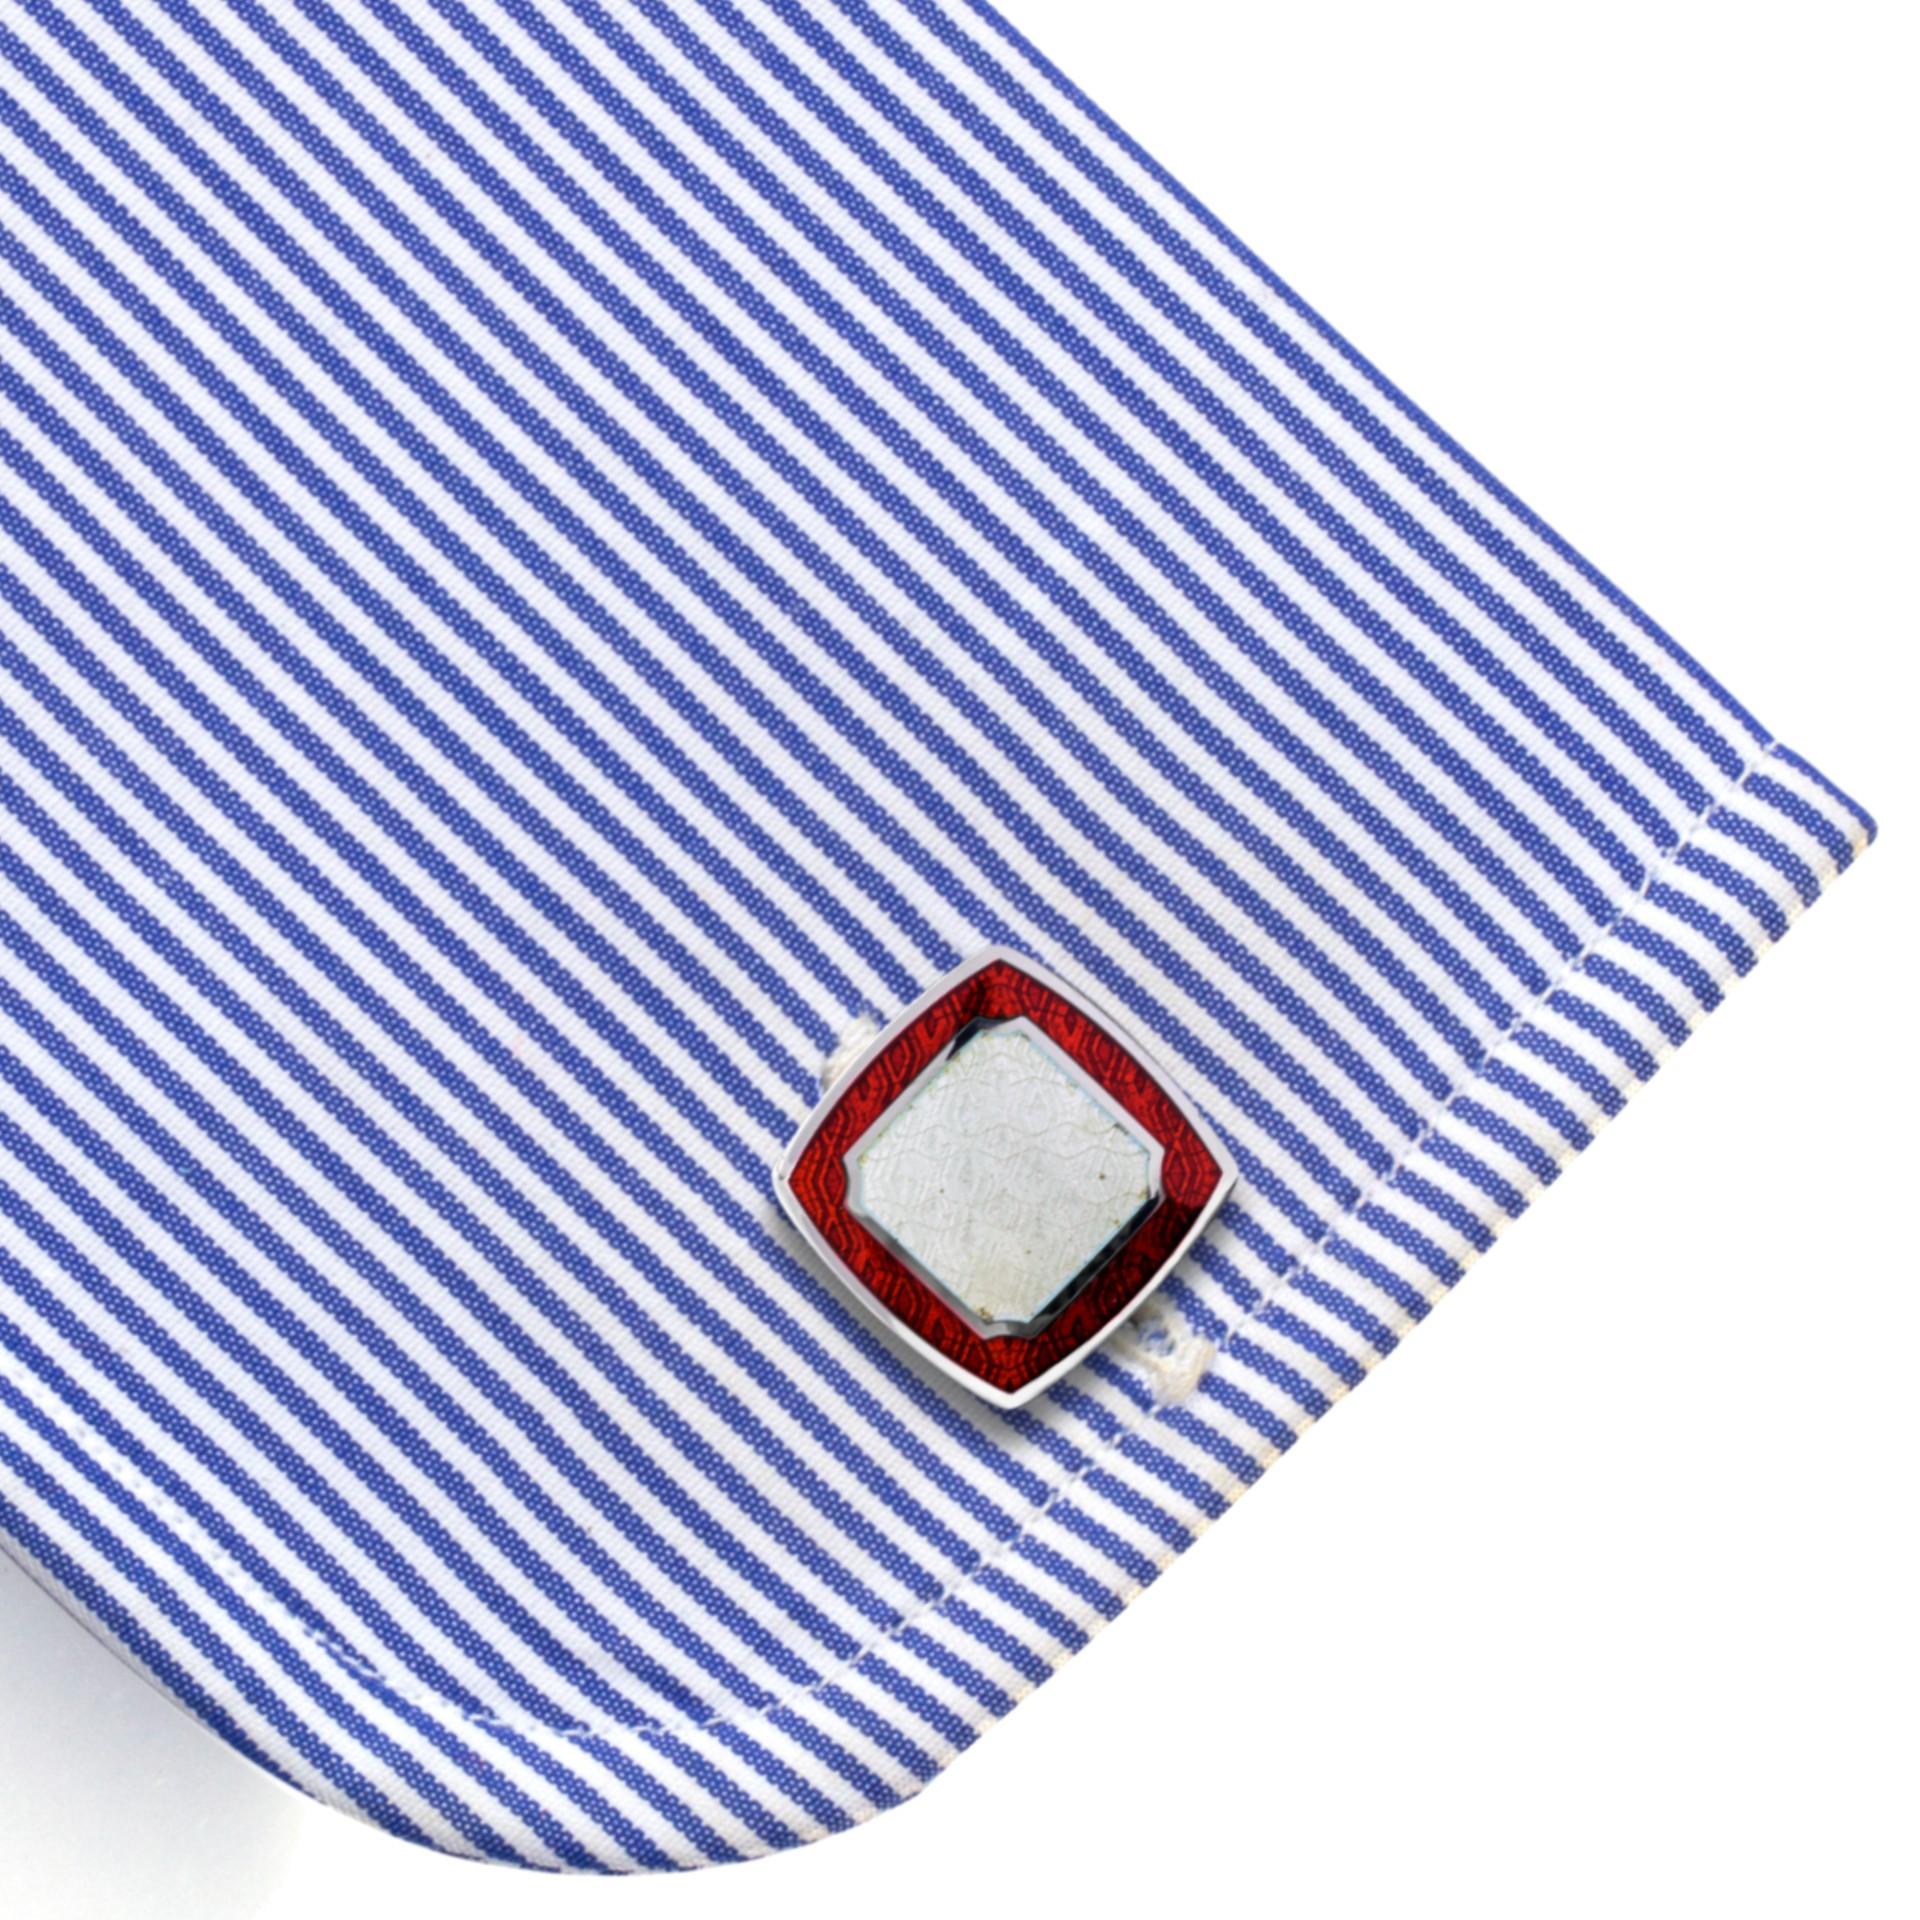 Alex Jona Red & White Enamel Sterling Silver Square Cufflinks In New Condition For Sale In Torino, IT